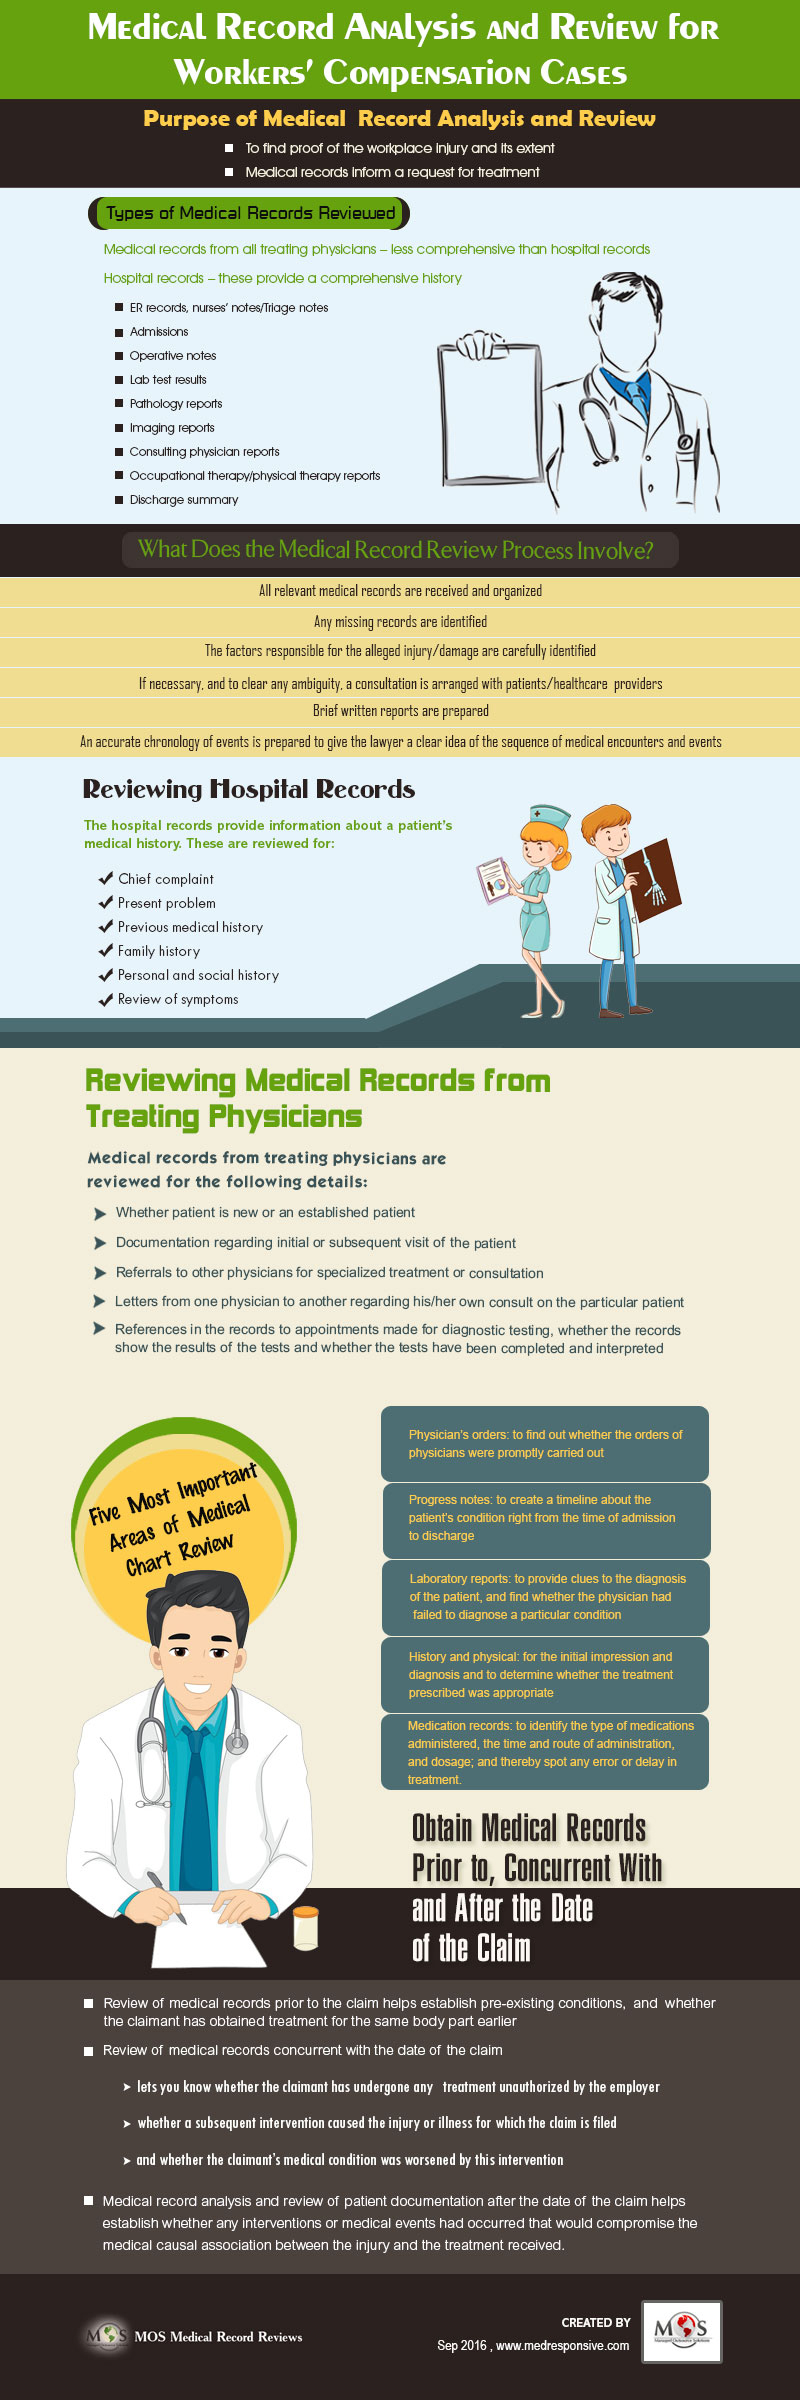 Medical Record Analysis and Review for Workers' Compensation Cases